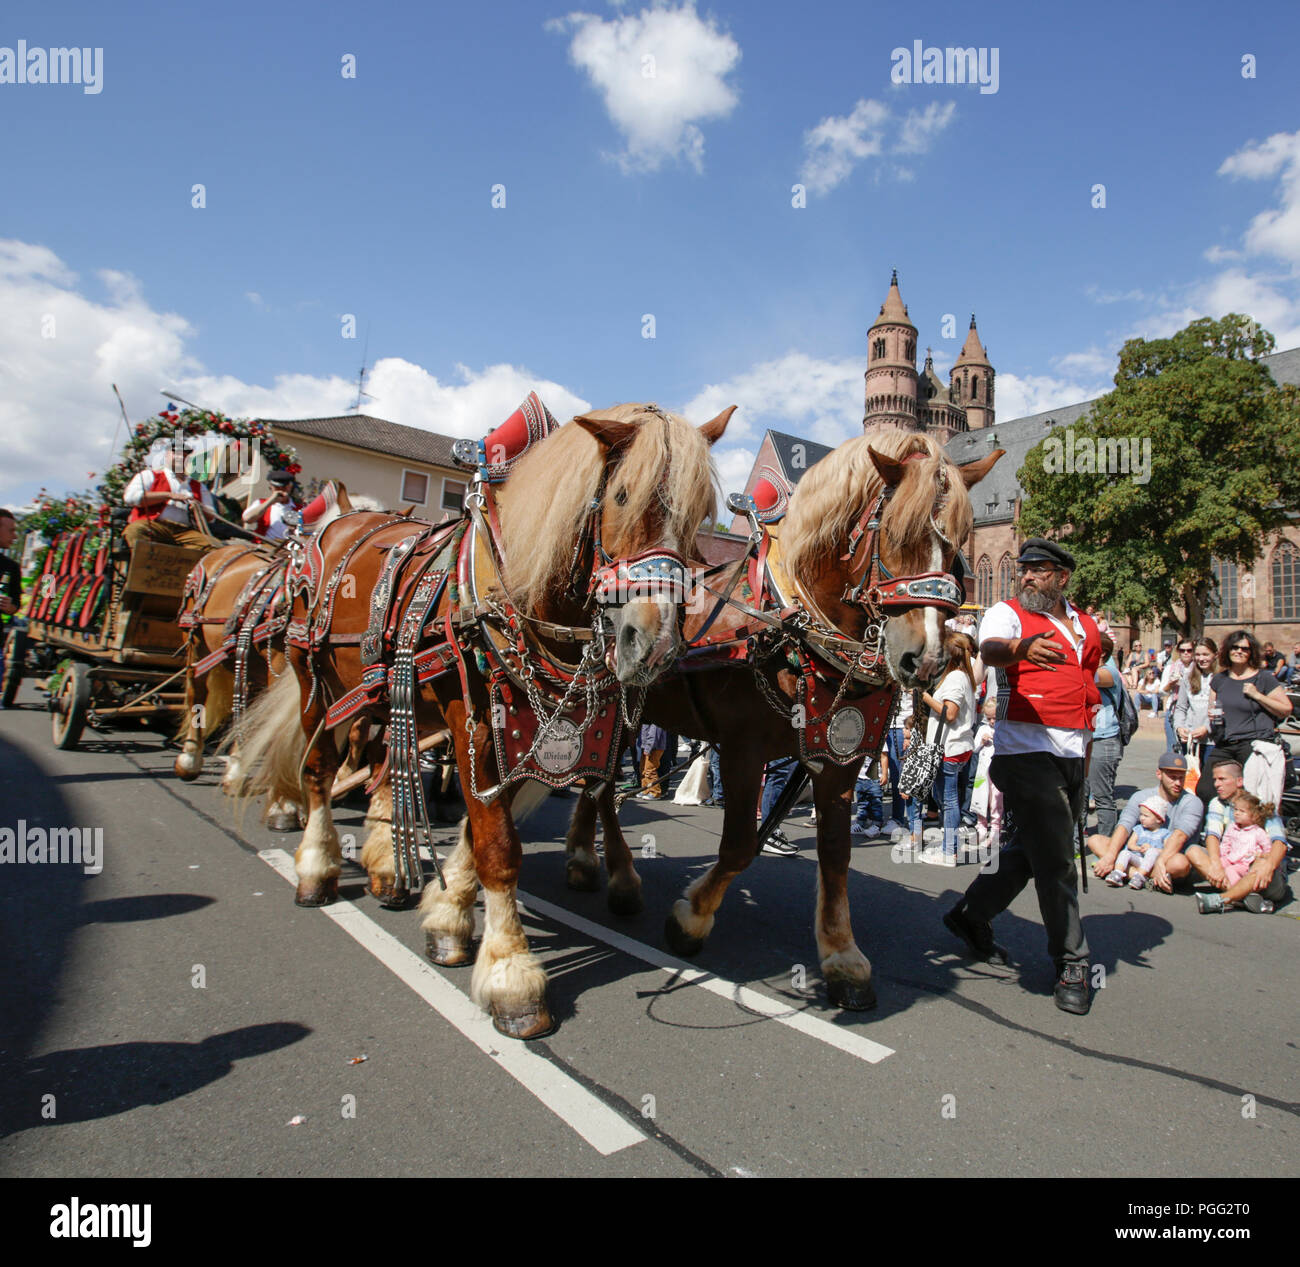 Worms, Germany. 26th August 2018. The Eichbaum brewery uses a vintage horse-drawn cart with beer barrel. The first highlight of the 2018 Backfischfest was the big parade through the city of Worms with over 70 groups and floats. Community groups, music groups and businesses from Worms and further afield took part. Credit: Michael Debets/Alamy Live News Stock Photo